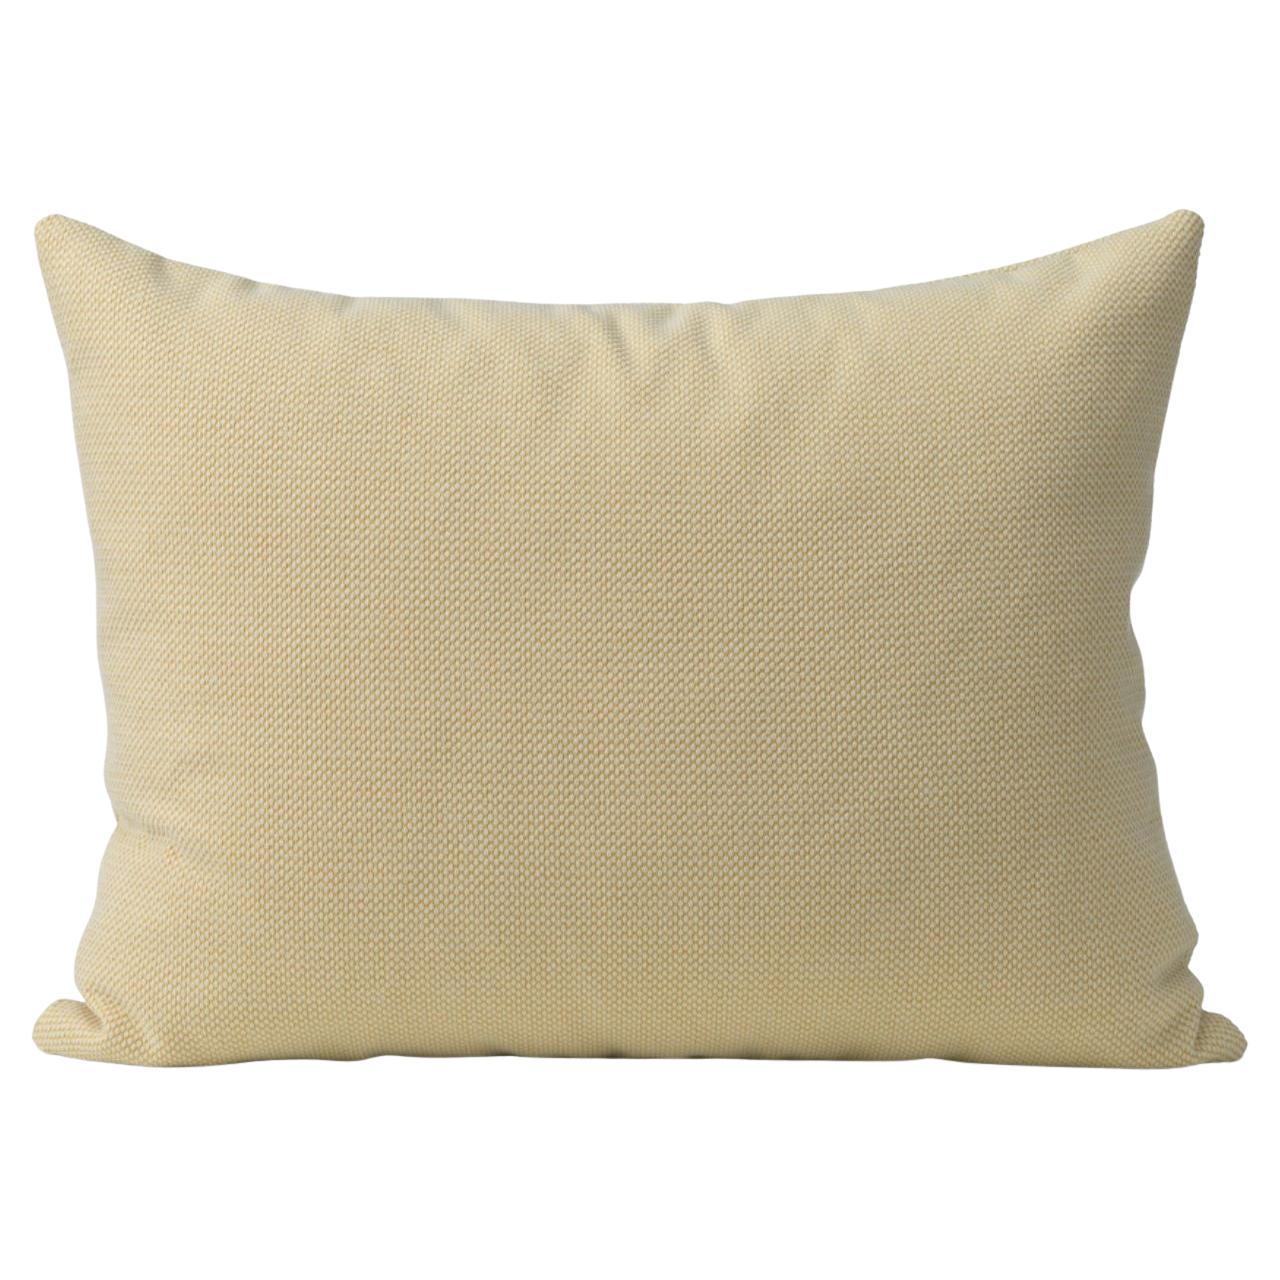 Galore Cushion Square Daffodil by Warm Nordic For Sale